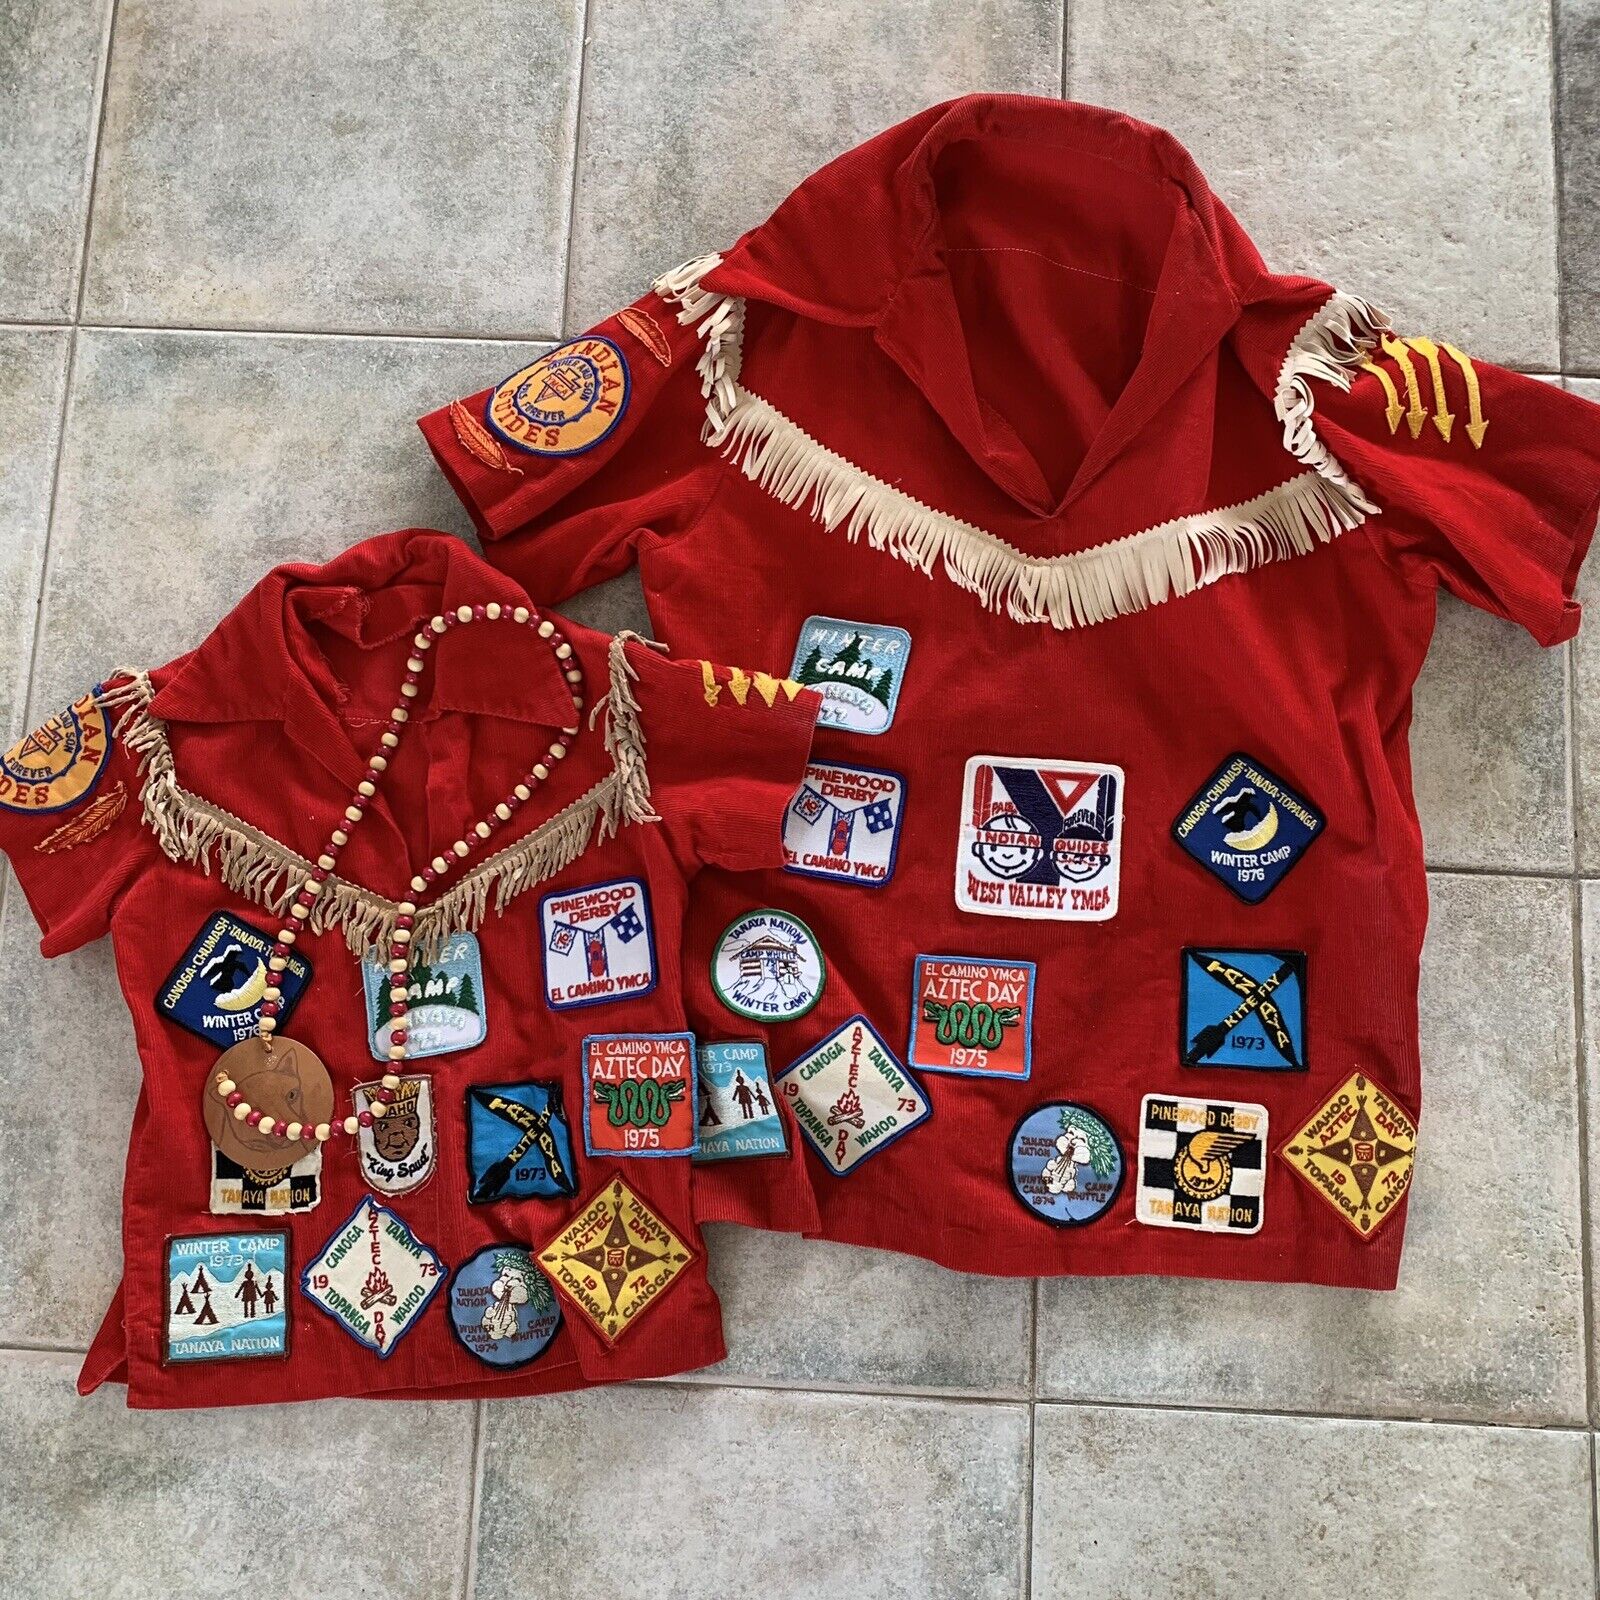 Vintage Fathers And Sons Camp Red Uniform With Patches, Y-Indian Guides YMCA 70s